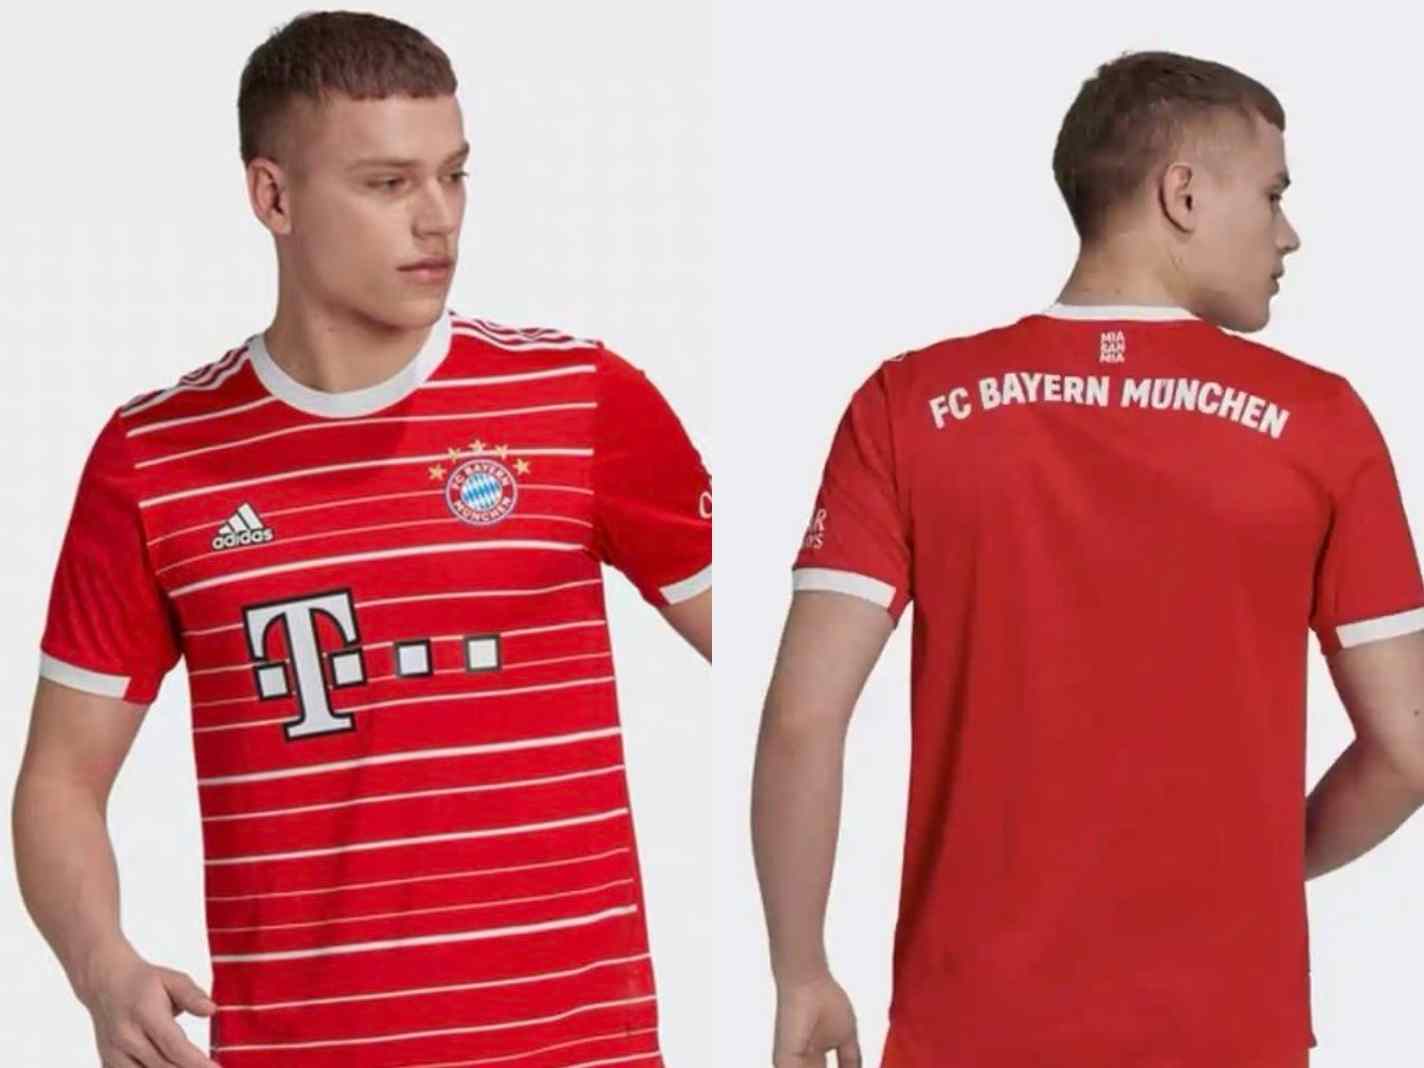 Bayern Munich home kit for 2223 season from Adidas leaks online